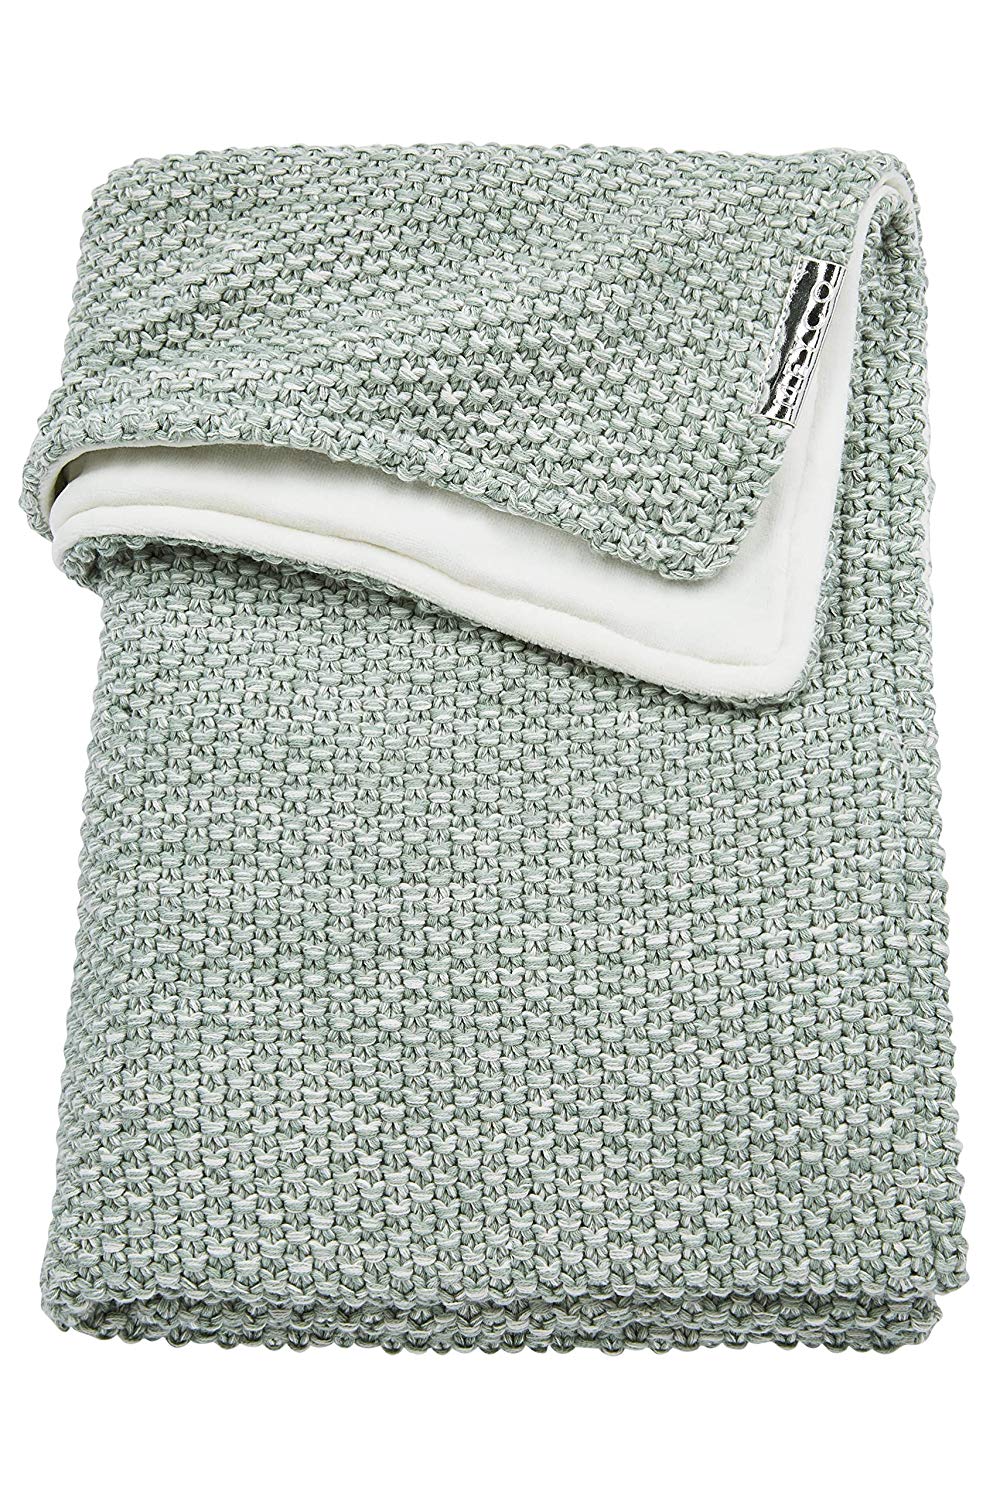 Meyco 2754084 Baby Blanket Winter Relief Mix Coarse Knitted 100 x 150 cm Sage Green